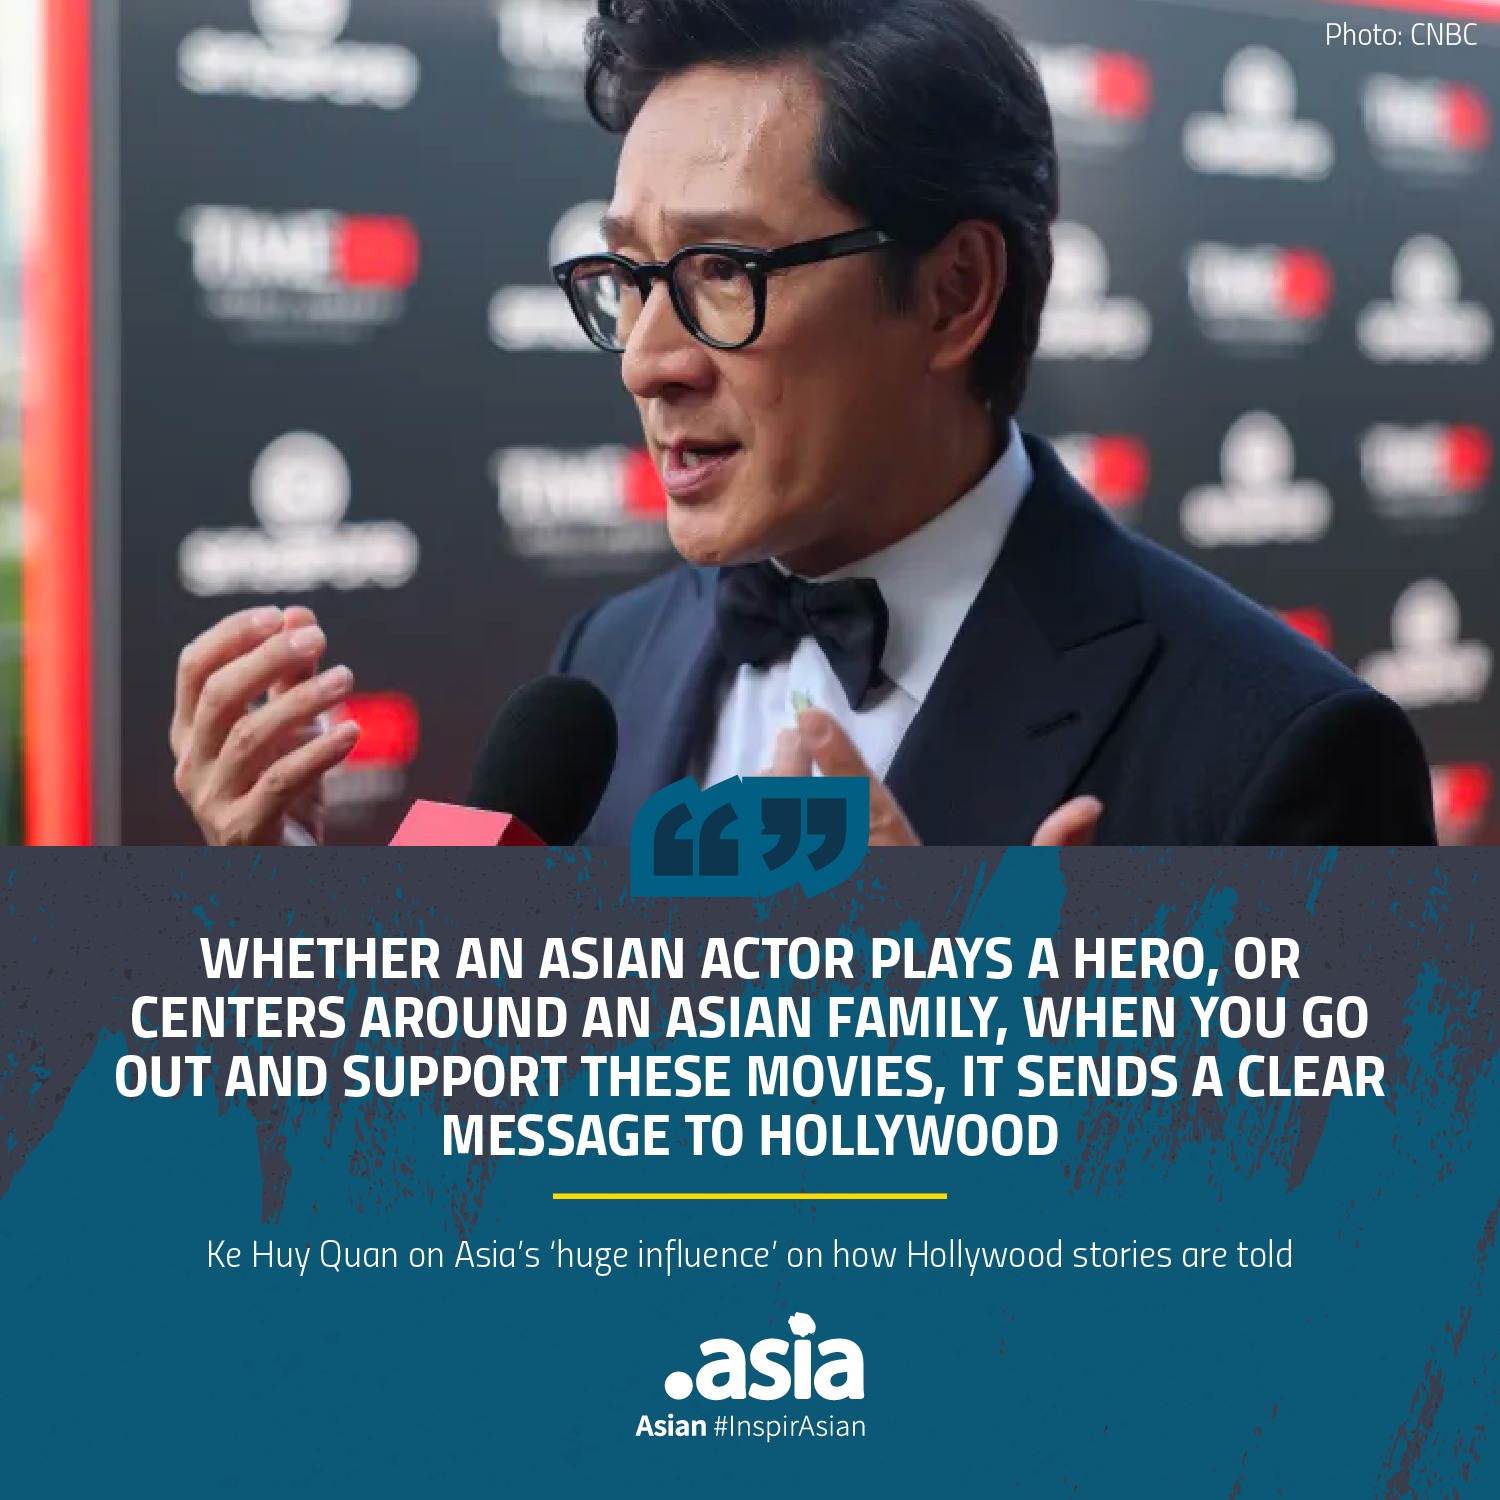 Image: Ke Huy Quan on Asia's huge influence on how Hollywood stories are told